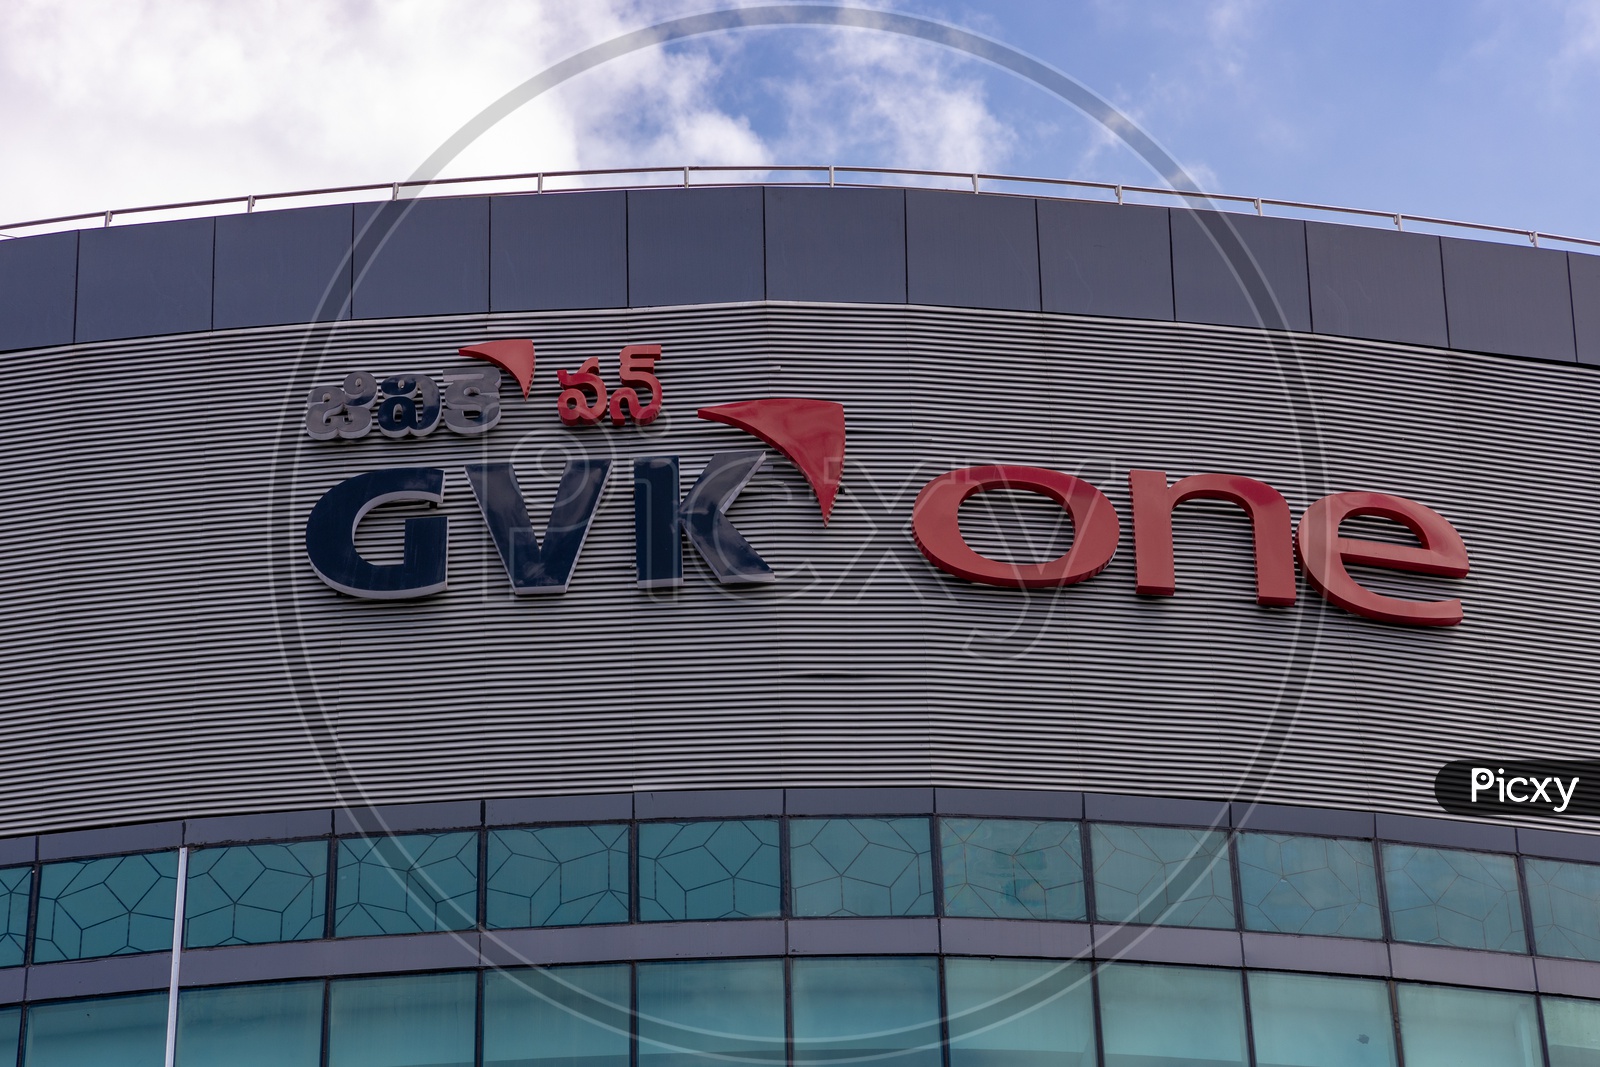 GVK One Mall Name Front view